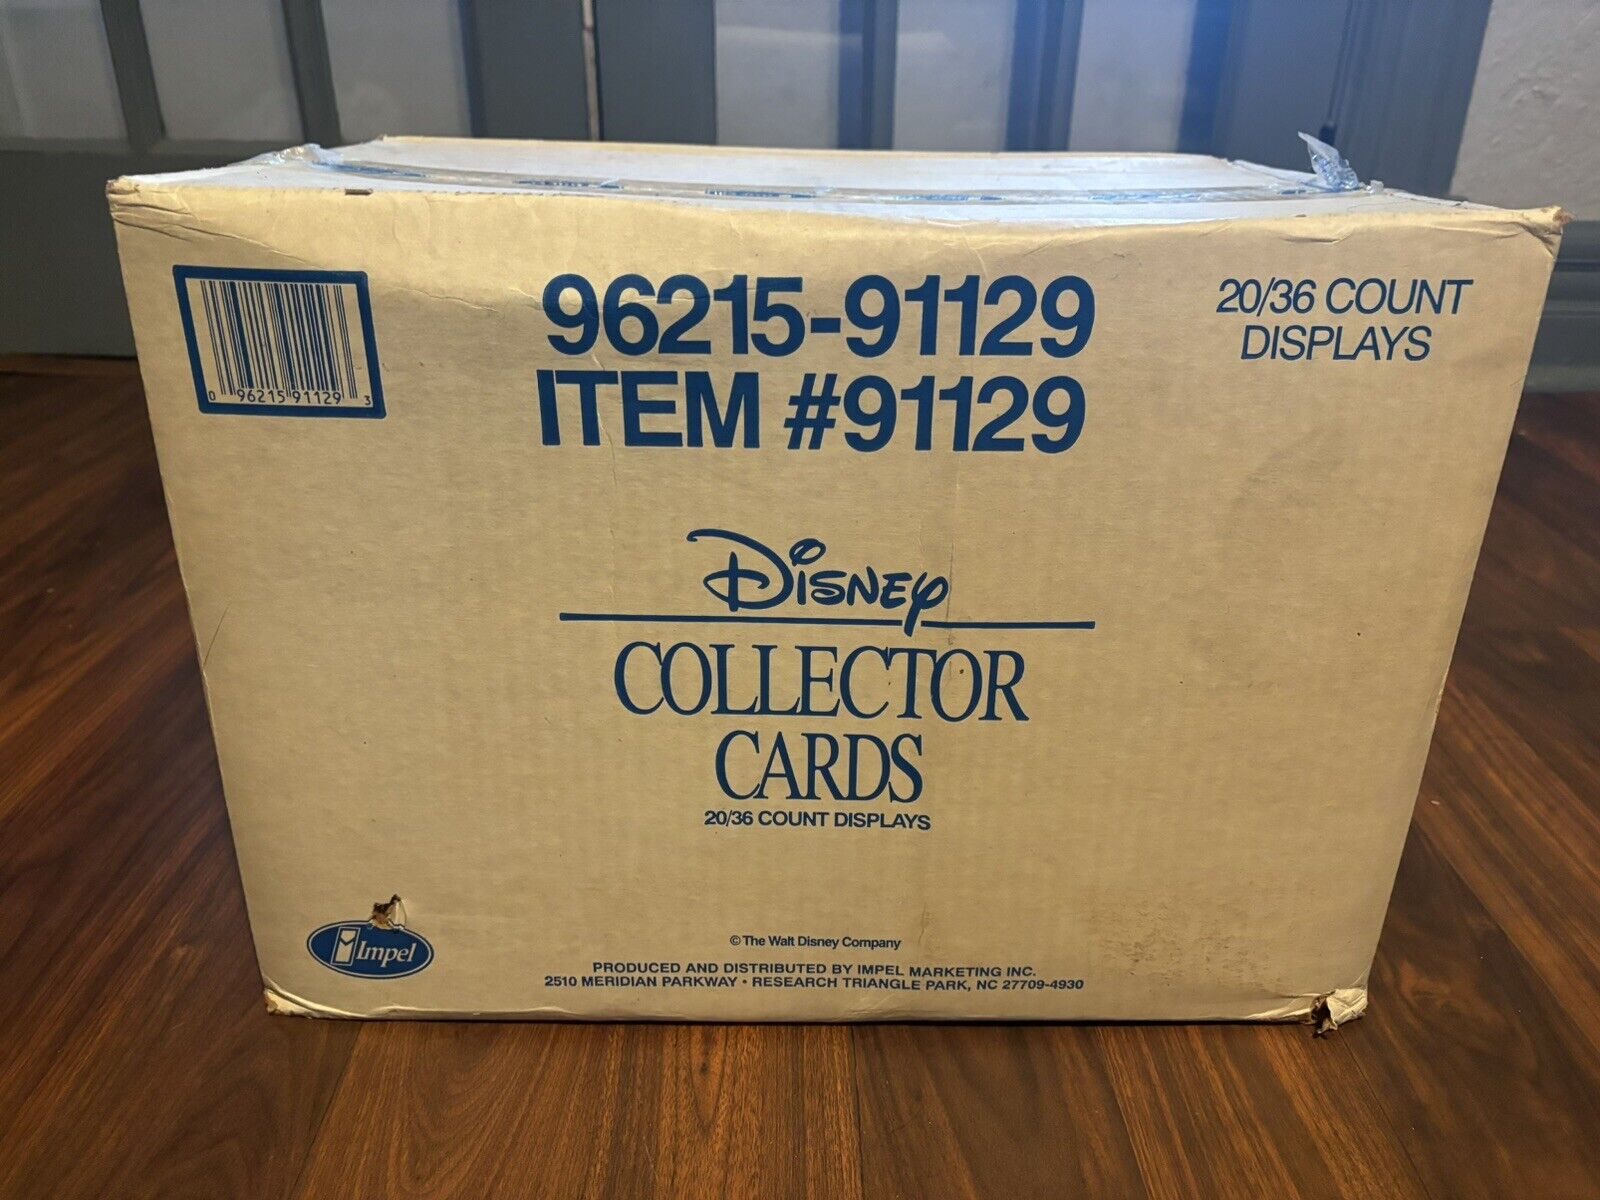 1991 Disney Collector Cards - Very Rare Factory Sealed Case